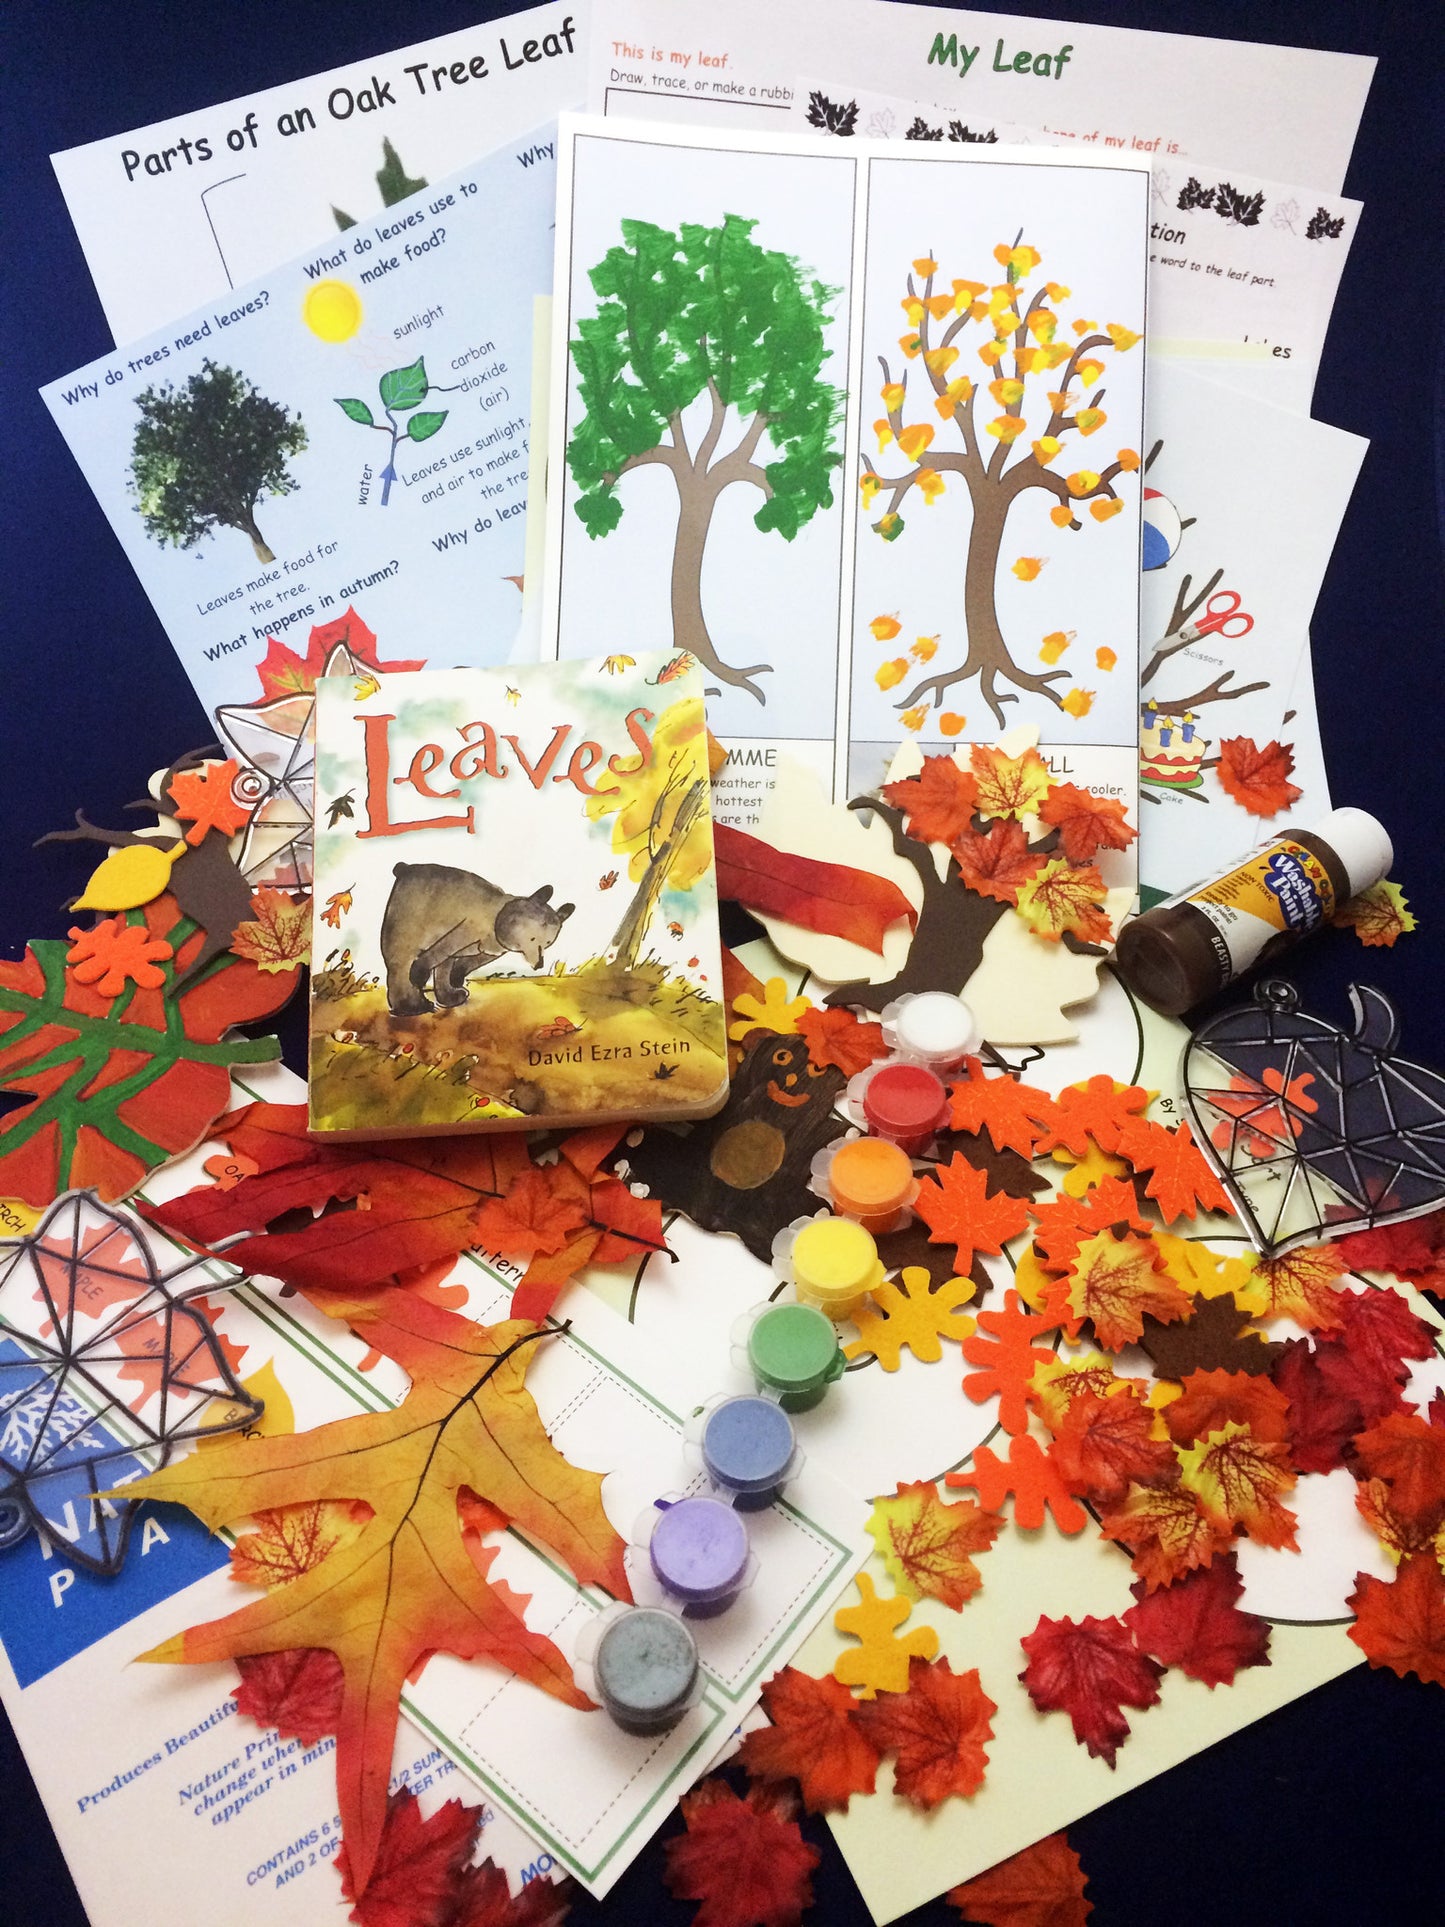 Fun and educational activities based on the book Leaves by David Ezra Stein